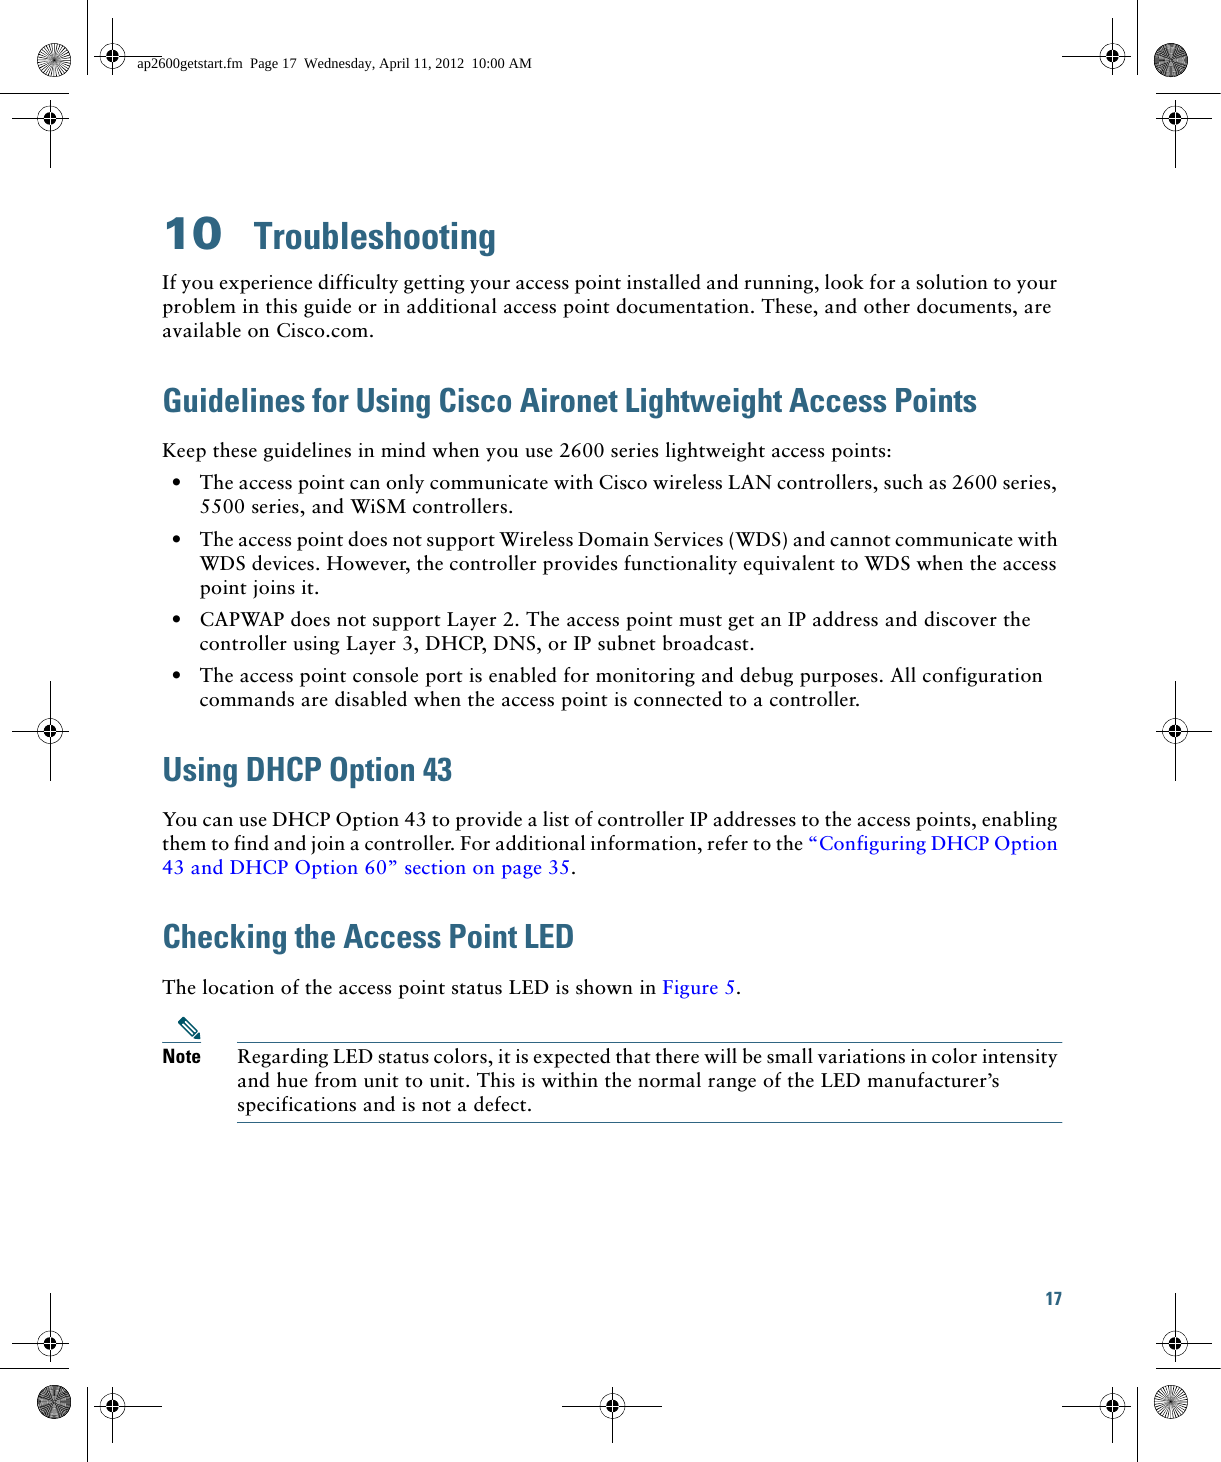 17 10  TroubleshootingIf you experience difficulty getting your access point installed and running, look for a solution to your problem in this guide or in additional access point documentation. These, and other documents, are available on Cisco.com.Guidelines for Using Cisco Aironet Lightweight Access PointsKeep these guidelines in mind when you use 2600 series lightweight access points:  • The access point can only communicate with Cisco wireless LAN controllers, such as 2600 series, 5500 series, and WiSM controllers.  • The access point does not support Wireless Domain Services (WDS) and cannot communicate with WDS devices. However, the controller provides functionality equivalent to WDS when the access point joins it.  • CAPWAP does not support Layer 2. The access point must get an IP address and discover the controller using Layer 3, DHCP, DNS, or IP subnet broadcast.  • The access point console port is enabled for monitoring and debug purposes. All configuration commands are disabled when the access point is connected to a controller. Using DHCP Option 43You can use DHCP Option 43 to provide a list of controller IP addresses to the access points, enabling them to find and join a controller. For additional information, refer to the “Configuring DHCP Option 43 and DHCP Option 60” section on page 35.Checking the Access Point LEDThe location of the access point status LED is shown in Figure 5.Note Regarding LED status colors, it is expected that there will be small variations in color intensity and hue from unit to unit. This is within the normal range of the LED manufacturer’s specifications and is not a defect.ap2600getstart.fm  Page 17  Wednesday, April 11, 2012  10:00 AM